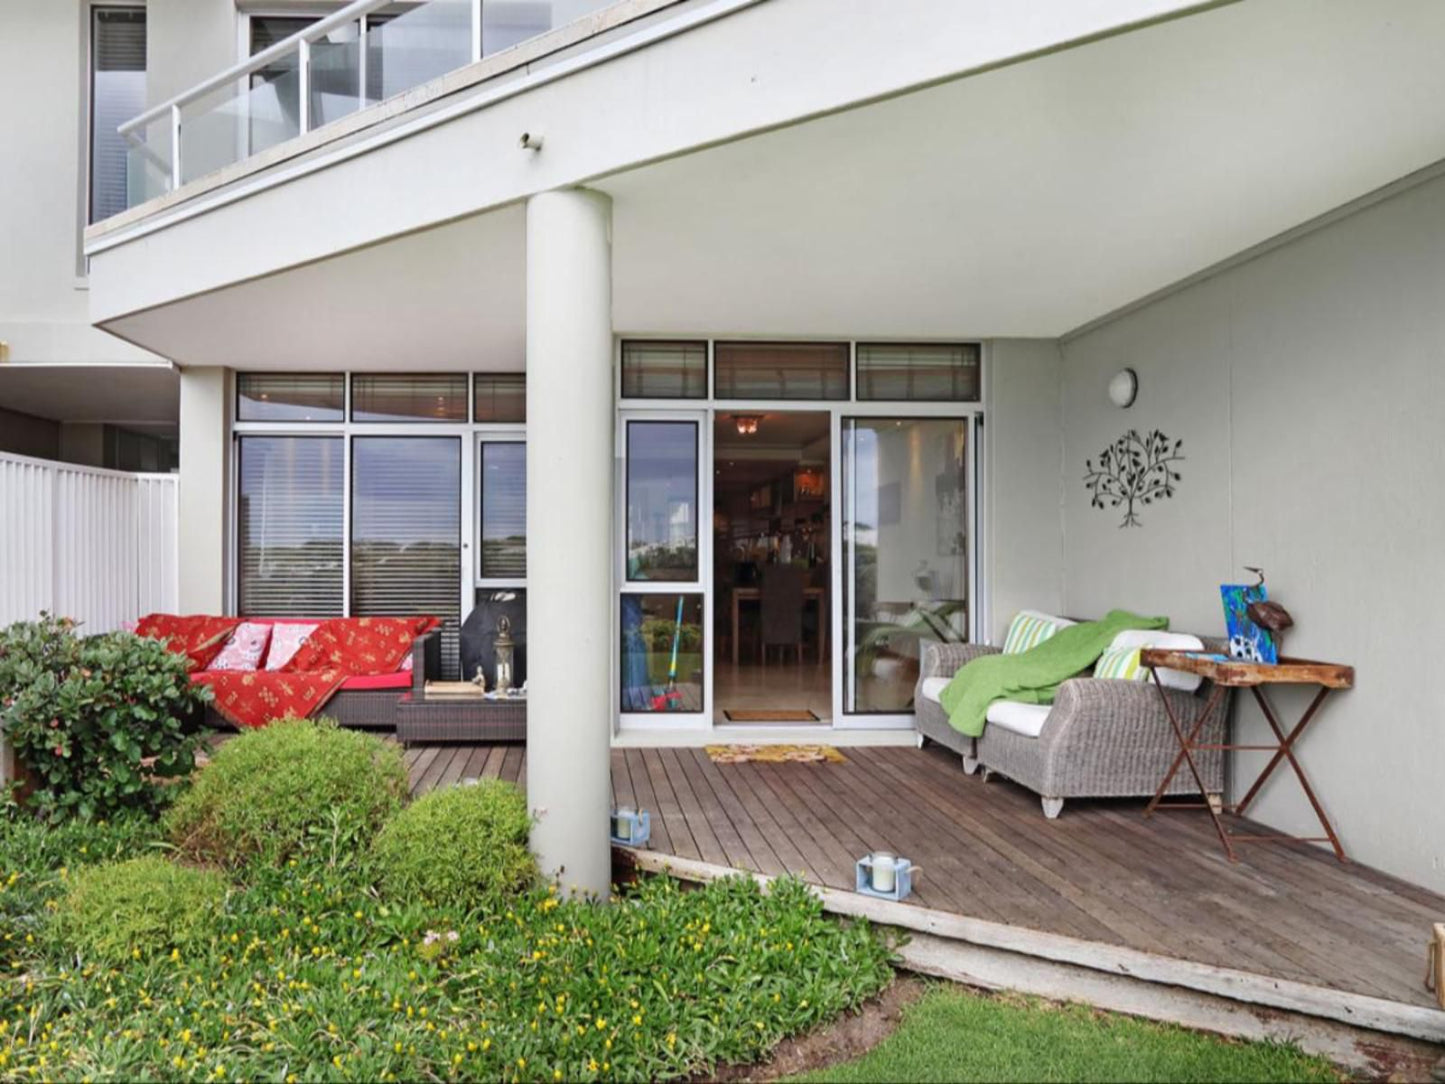 Dolphin Beach E5 By Hostagents Blouberg Cape Town Western Cape South Africa House, Building, Architecture